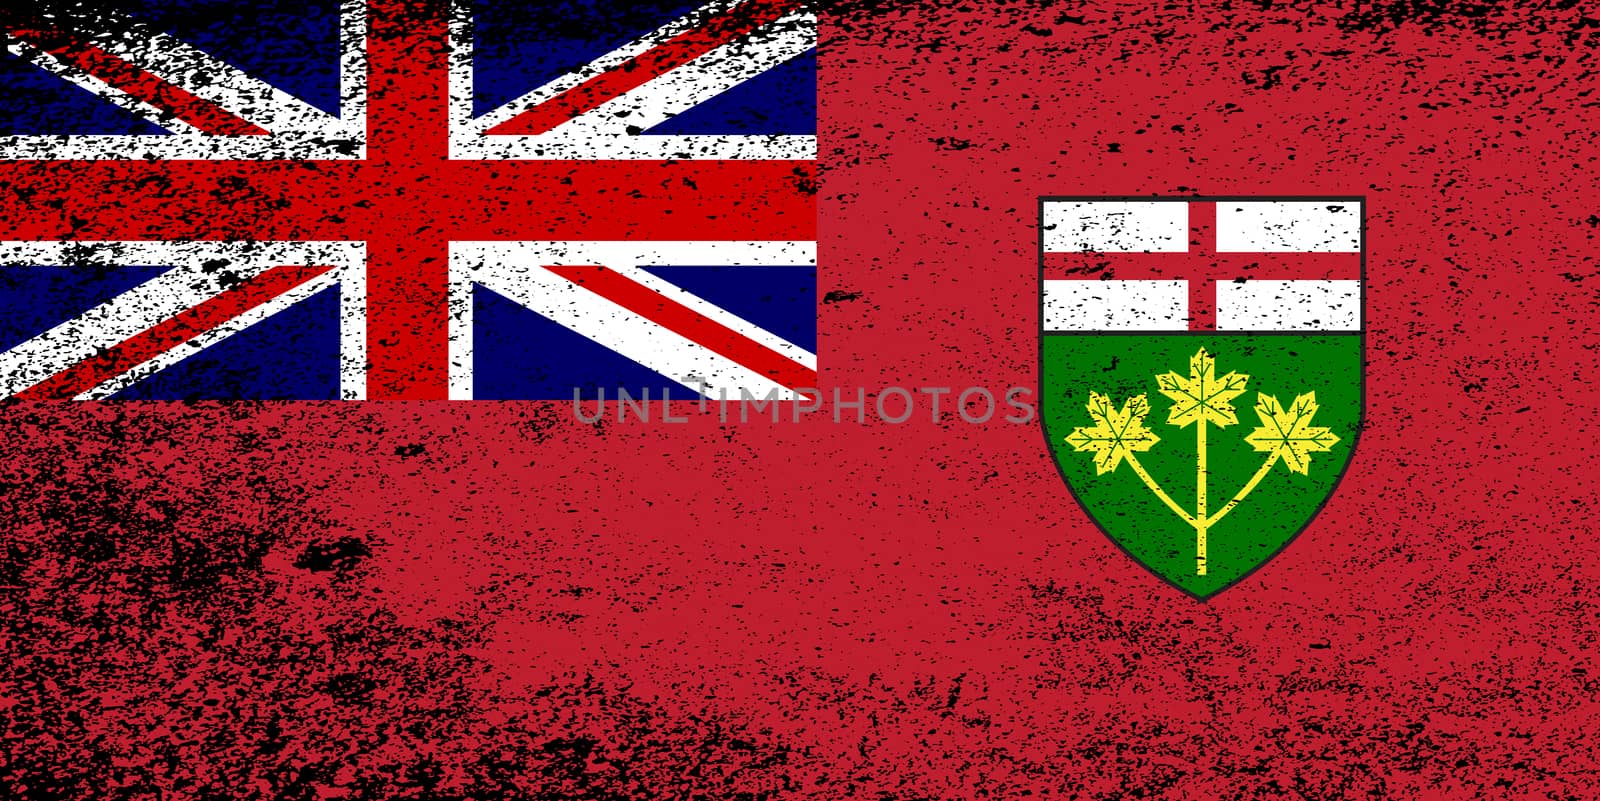 The Provincial Flag Of Ontario Canada with motif and Union Flag with grunge FX